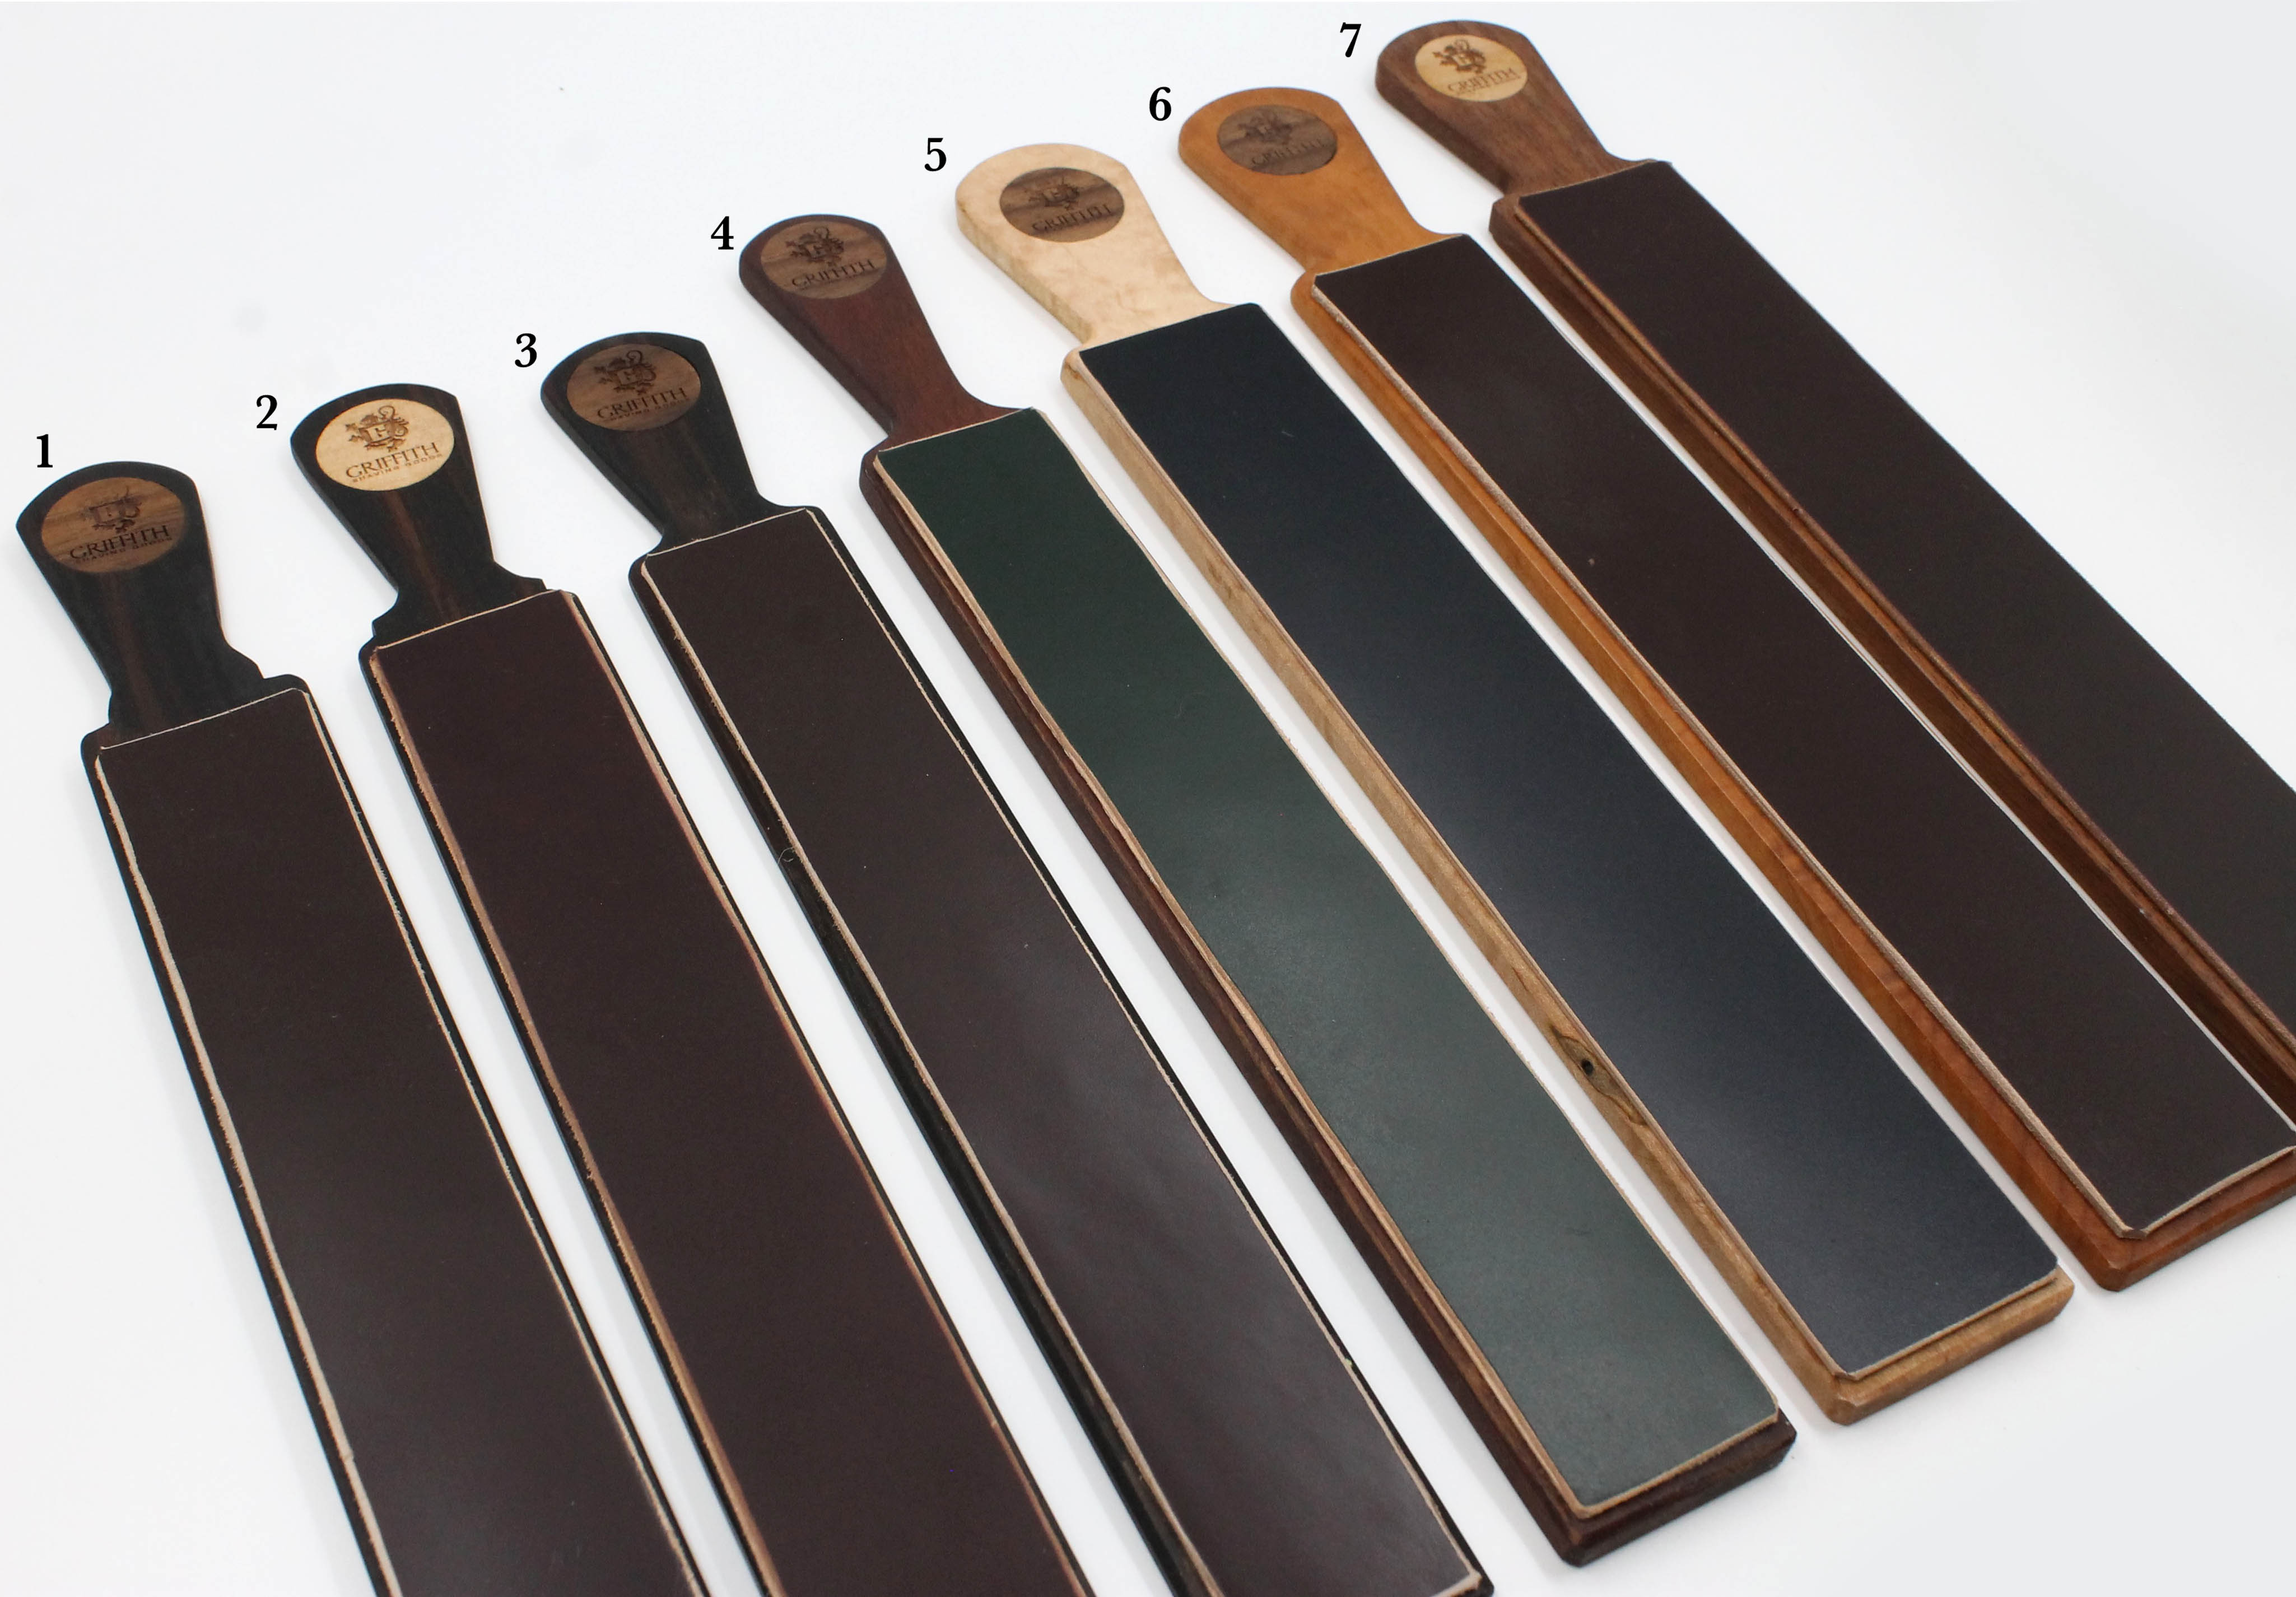 GSG Shell Cordovan & Fine Hardwood Paddle Strops Group 1 - CHOOSE YOUR STROP